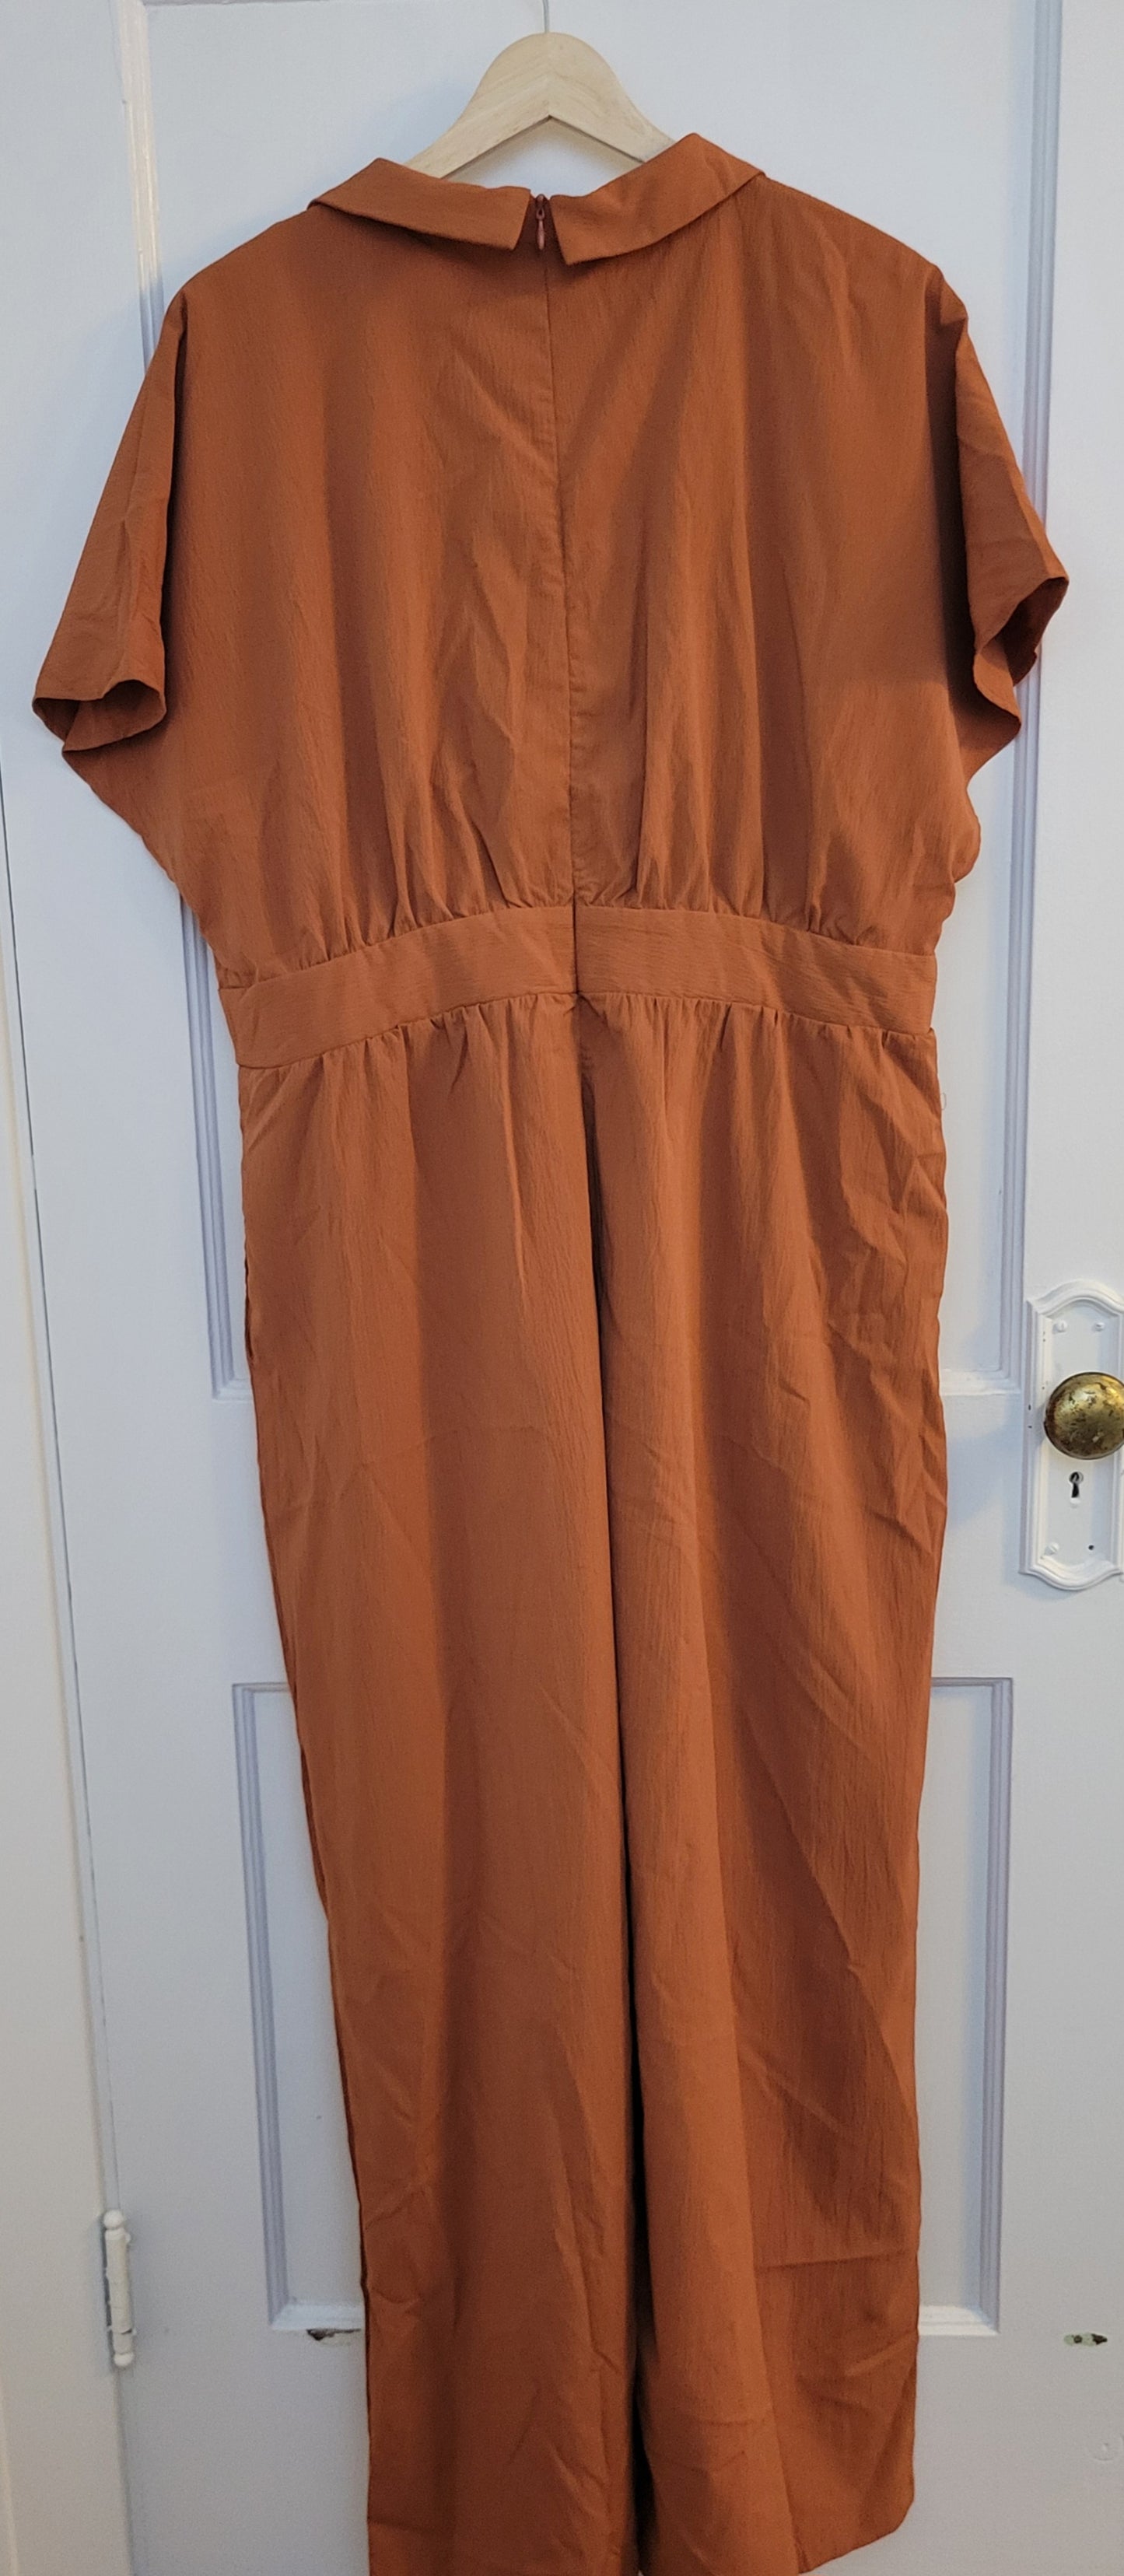 * Reduced * Cider Burnt Orange Collared Jumpsuit, Women's Size 1XL NEW WITH TAGS